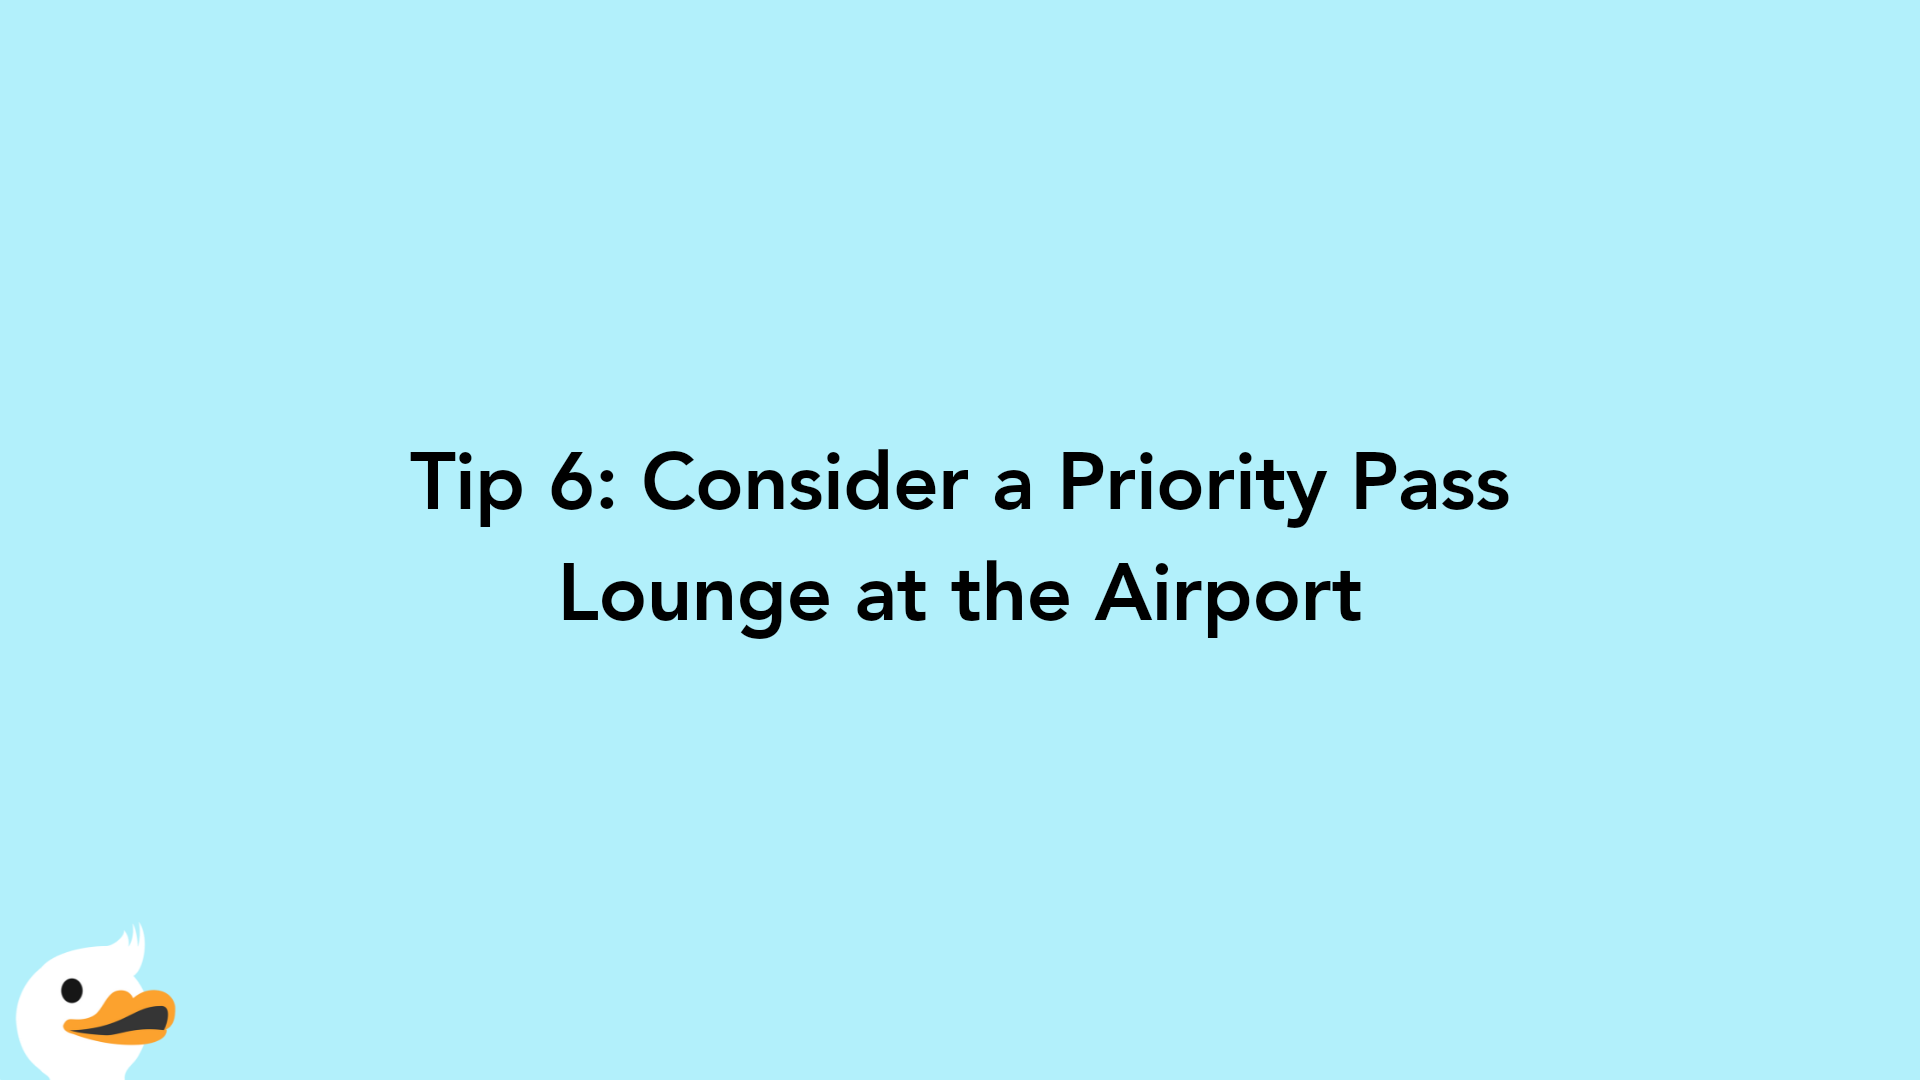 Tip 6: Consider a Priority Pass Lounge at the Airport